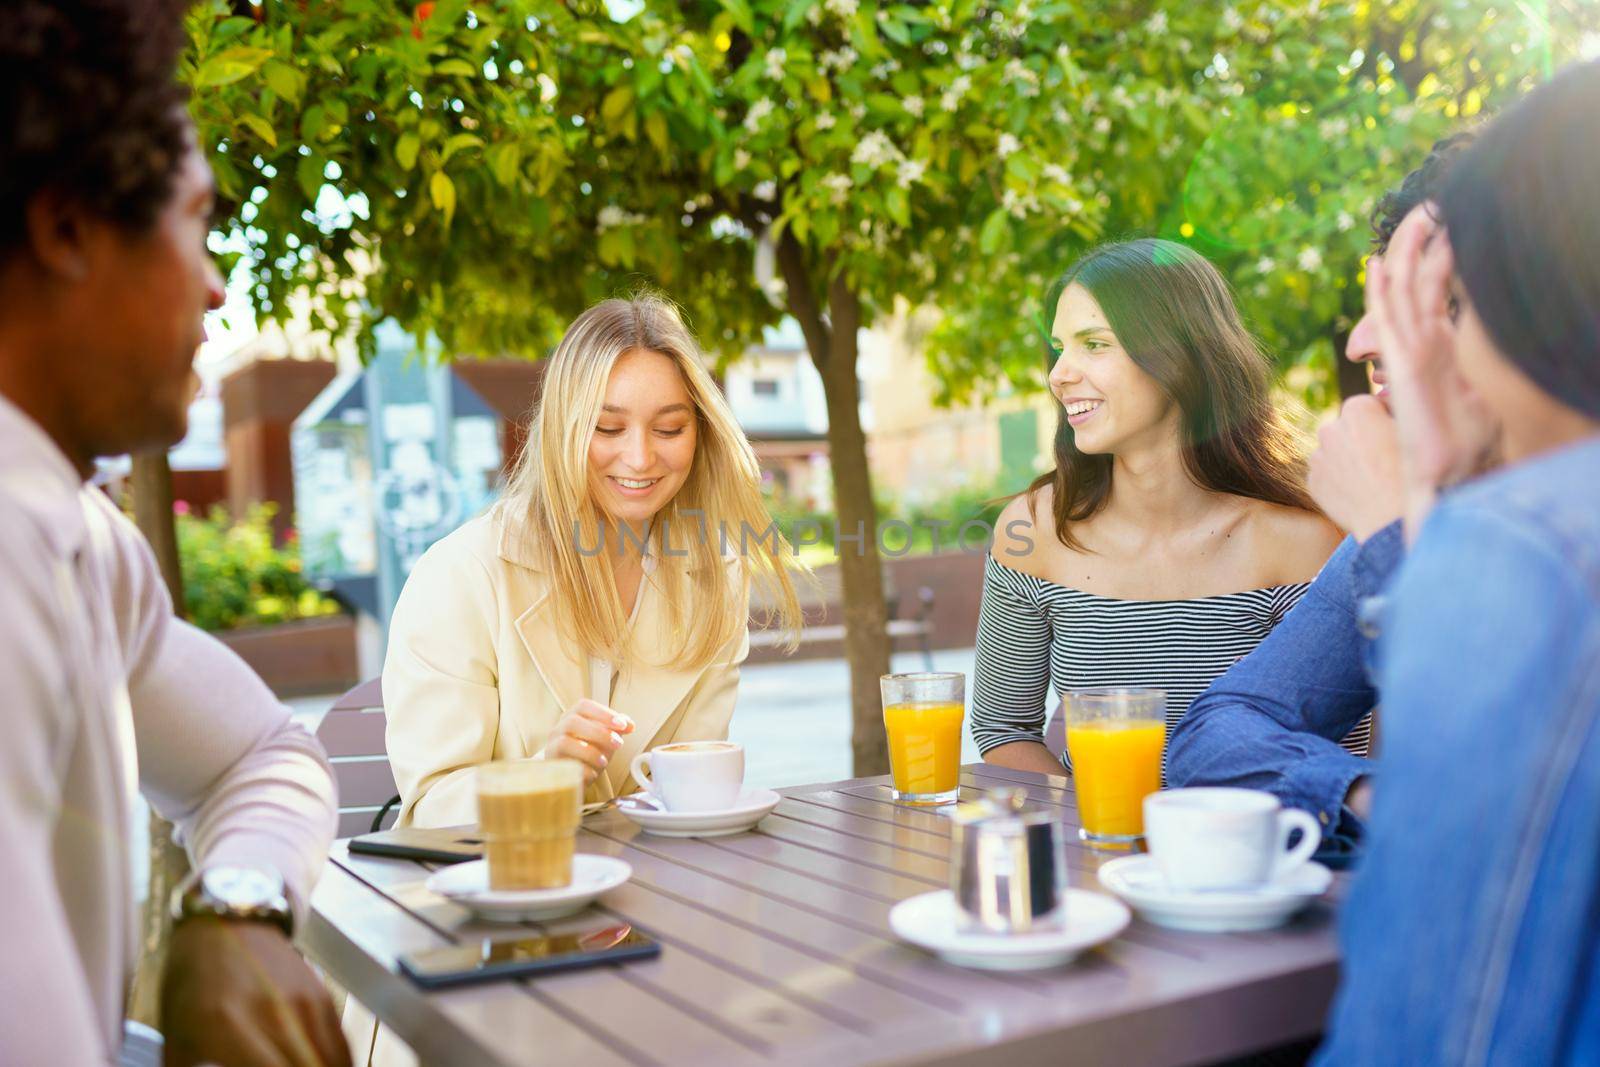 Multi-ethnic group of friends having a drink together in an outdoor bar. Three women and two men in a caf talking, laughing and enjoying their time.